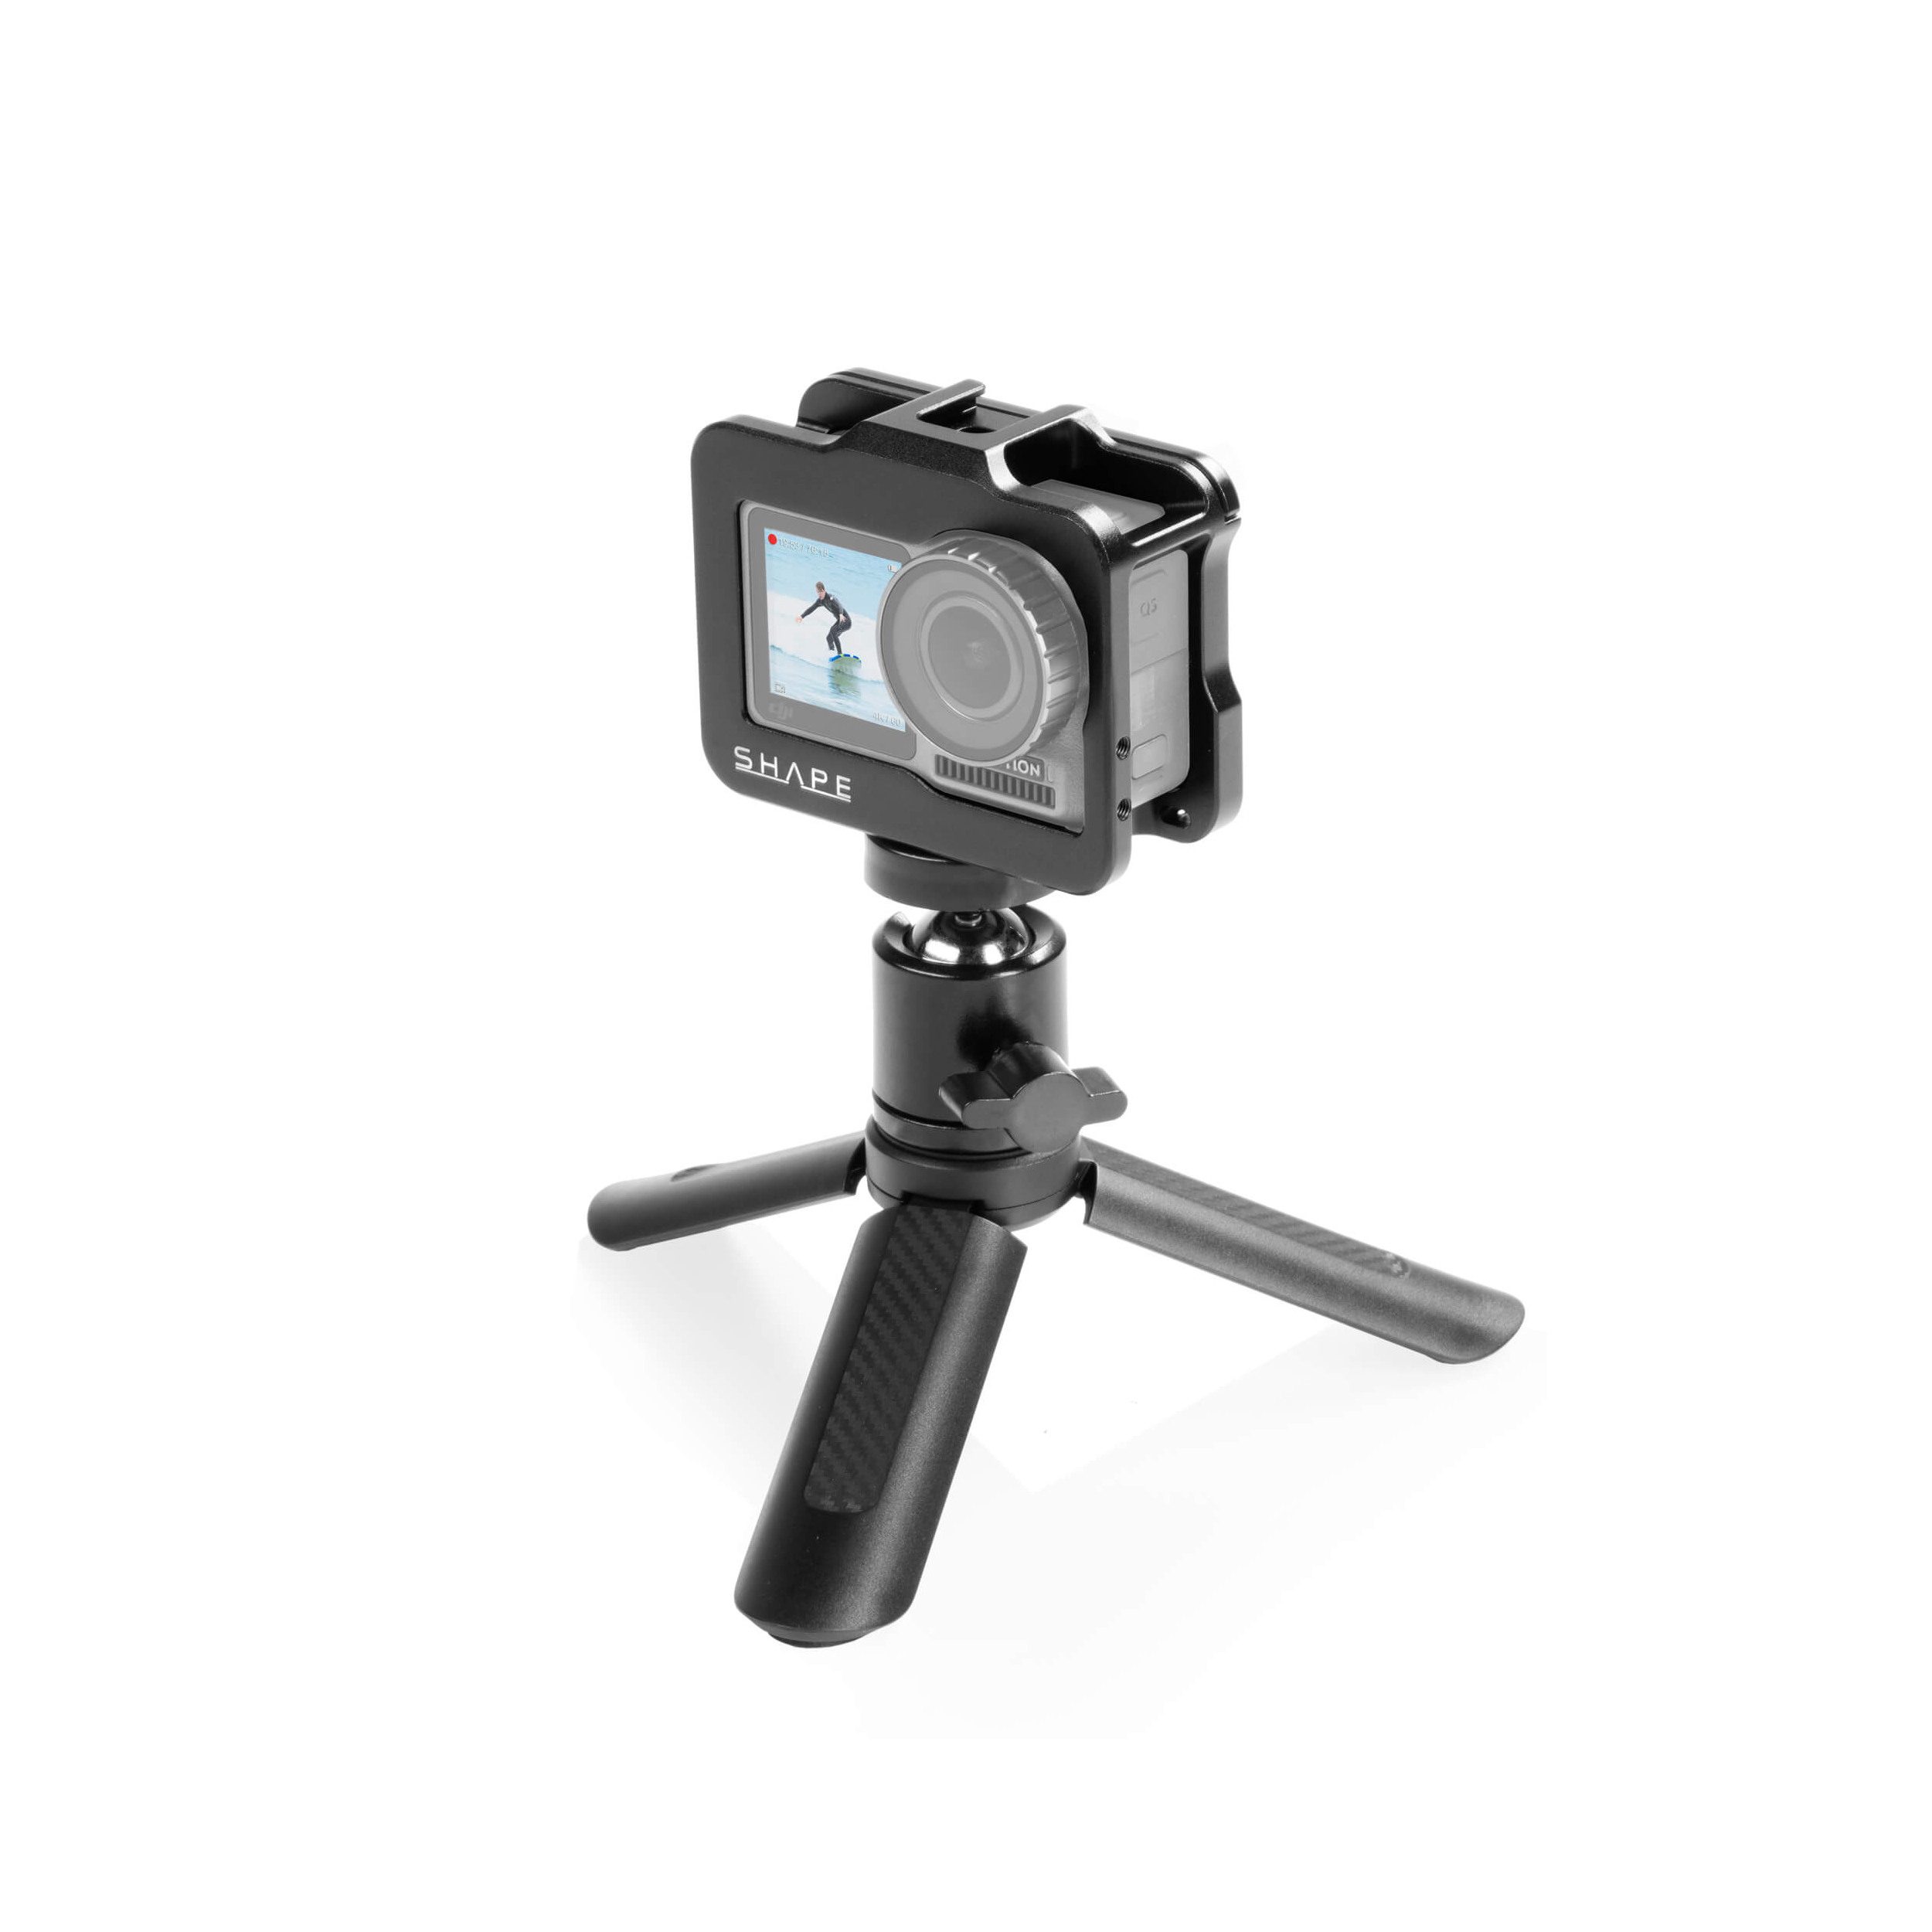 SHAPE Cage with Selfie Grip Mini Tripod for DJI Osmo Action Camera